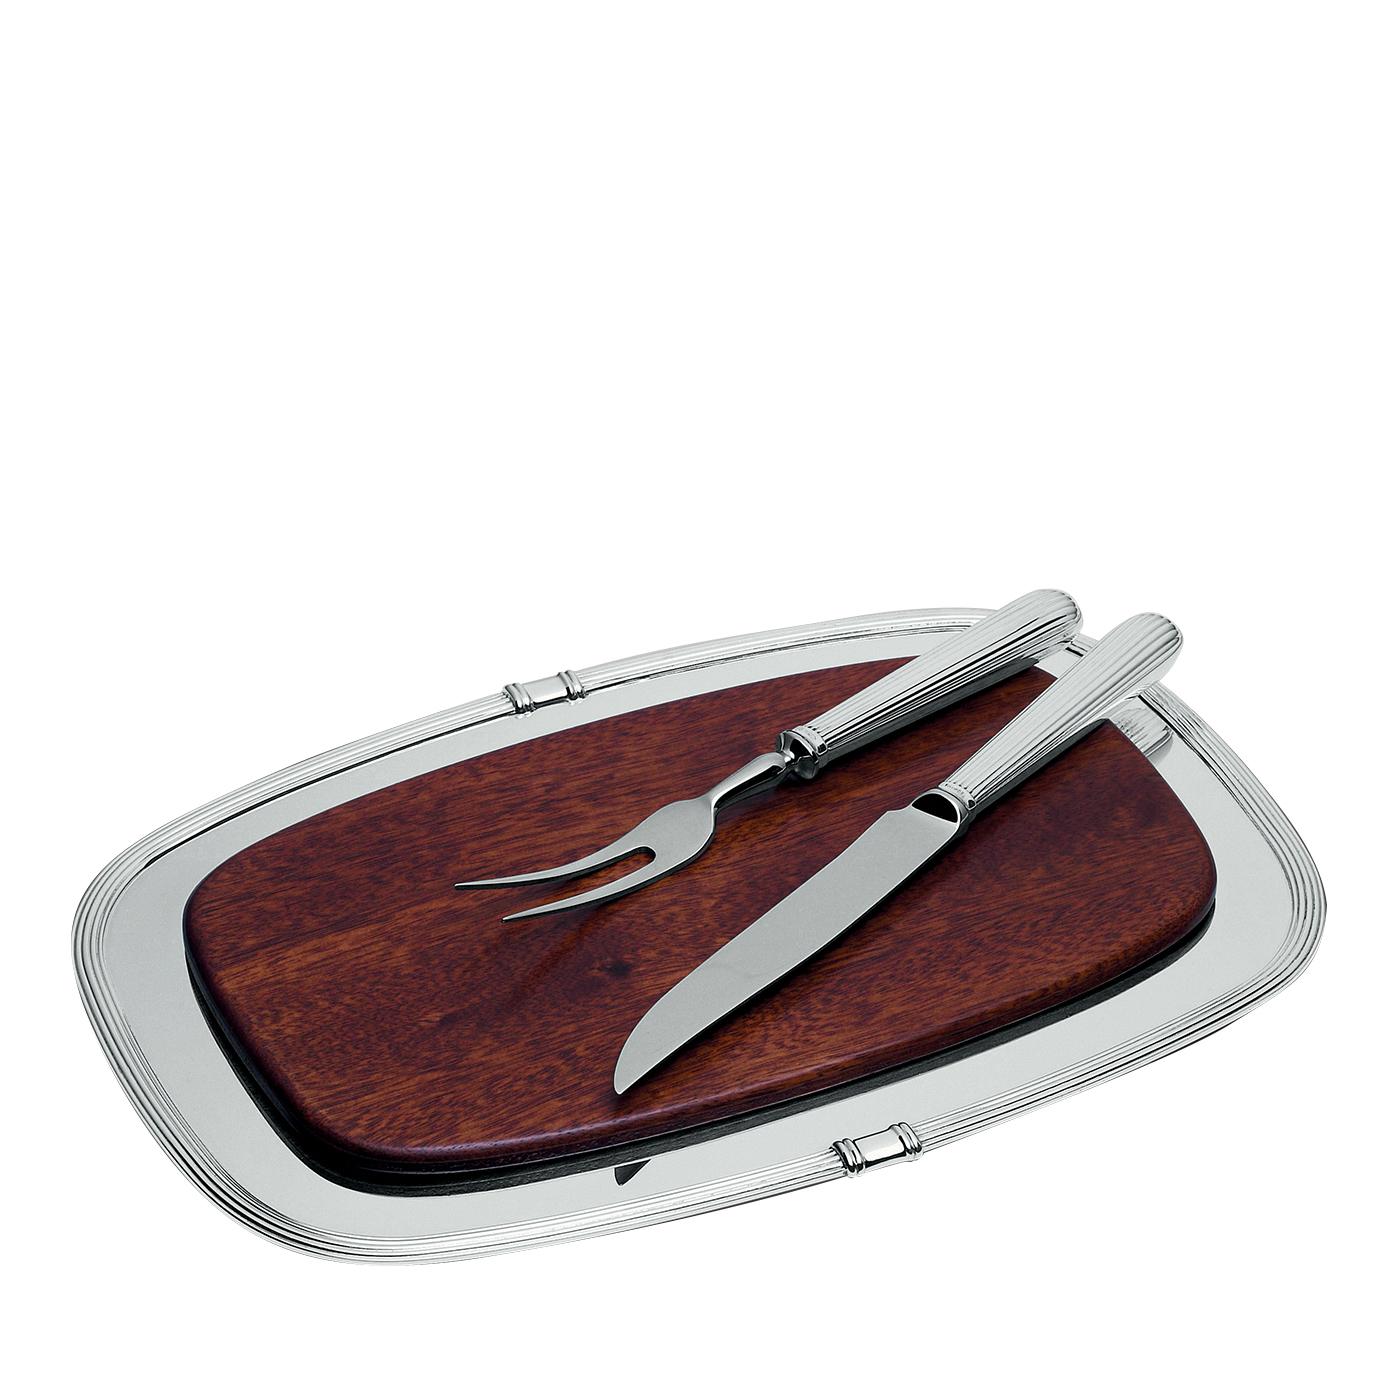 Cesa 1882 refined creations are distinguished for their rich details and historical inspirations, brought to life by artistic traditions and exceptional craftsmanship. This refined set includes a carving fork, a carving knife, and a rectangular